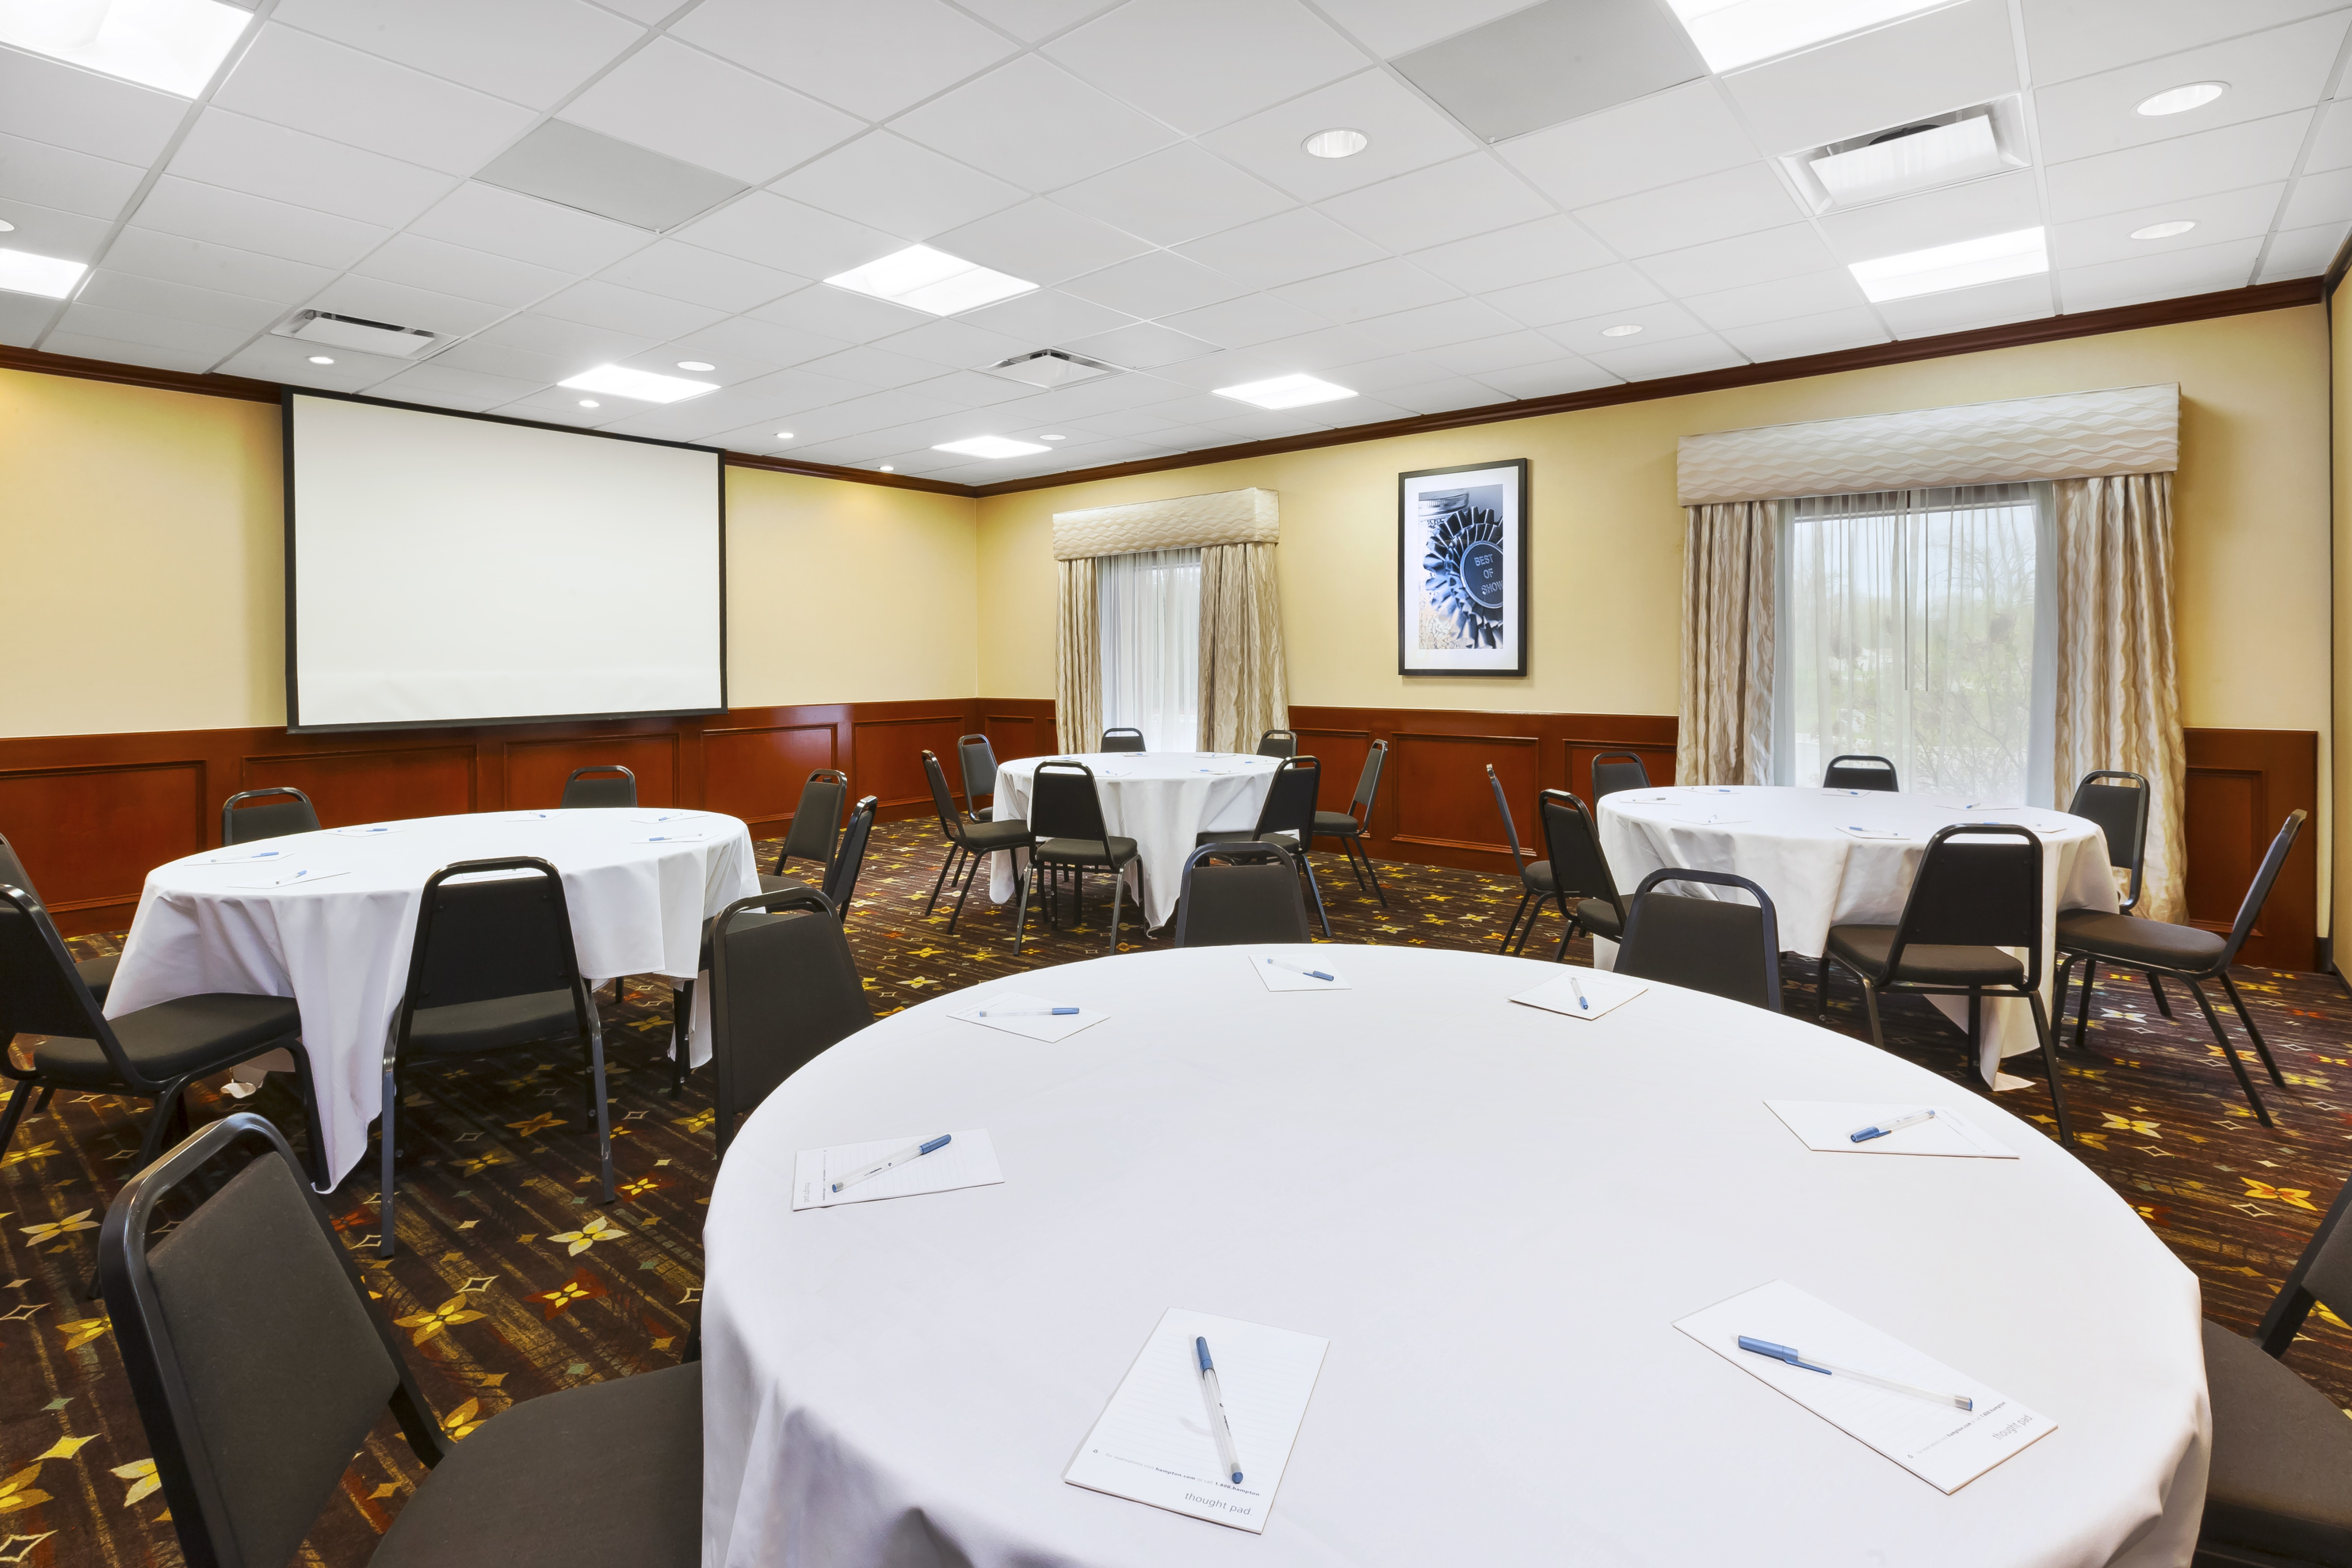 Meeting Room with Round Tables